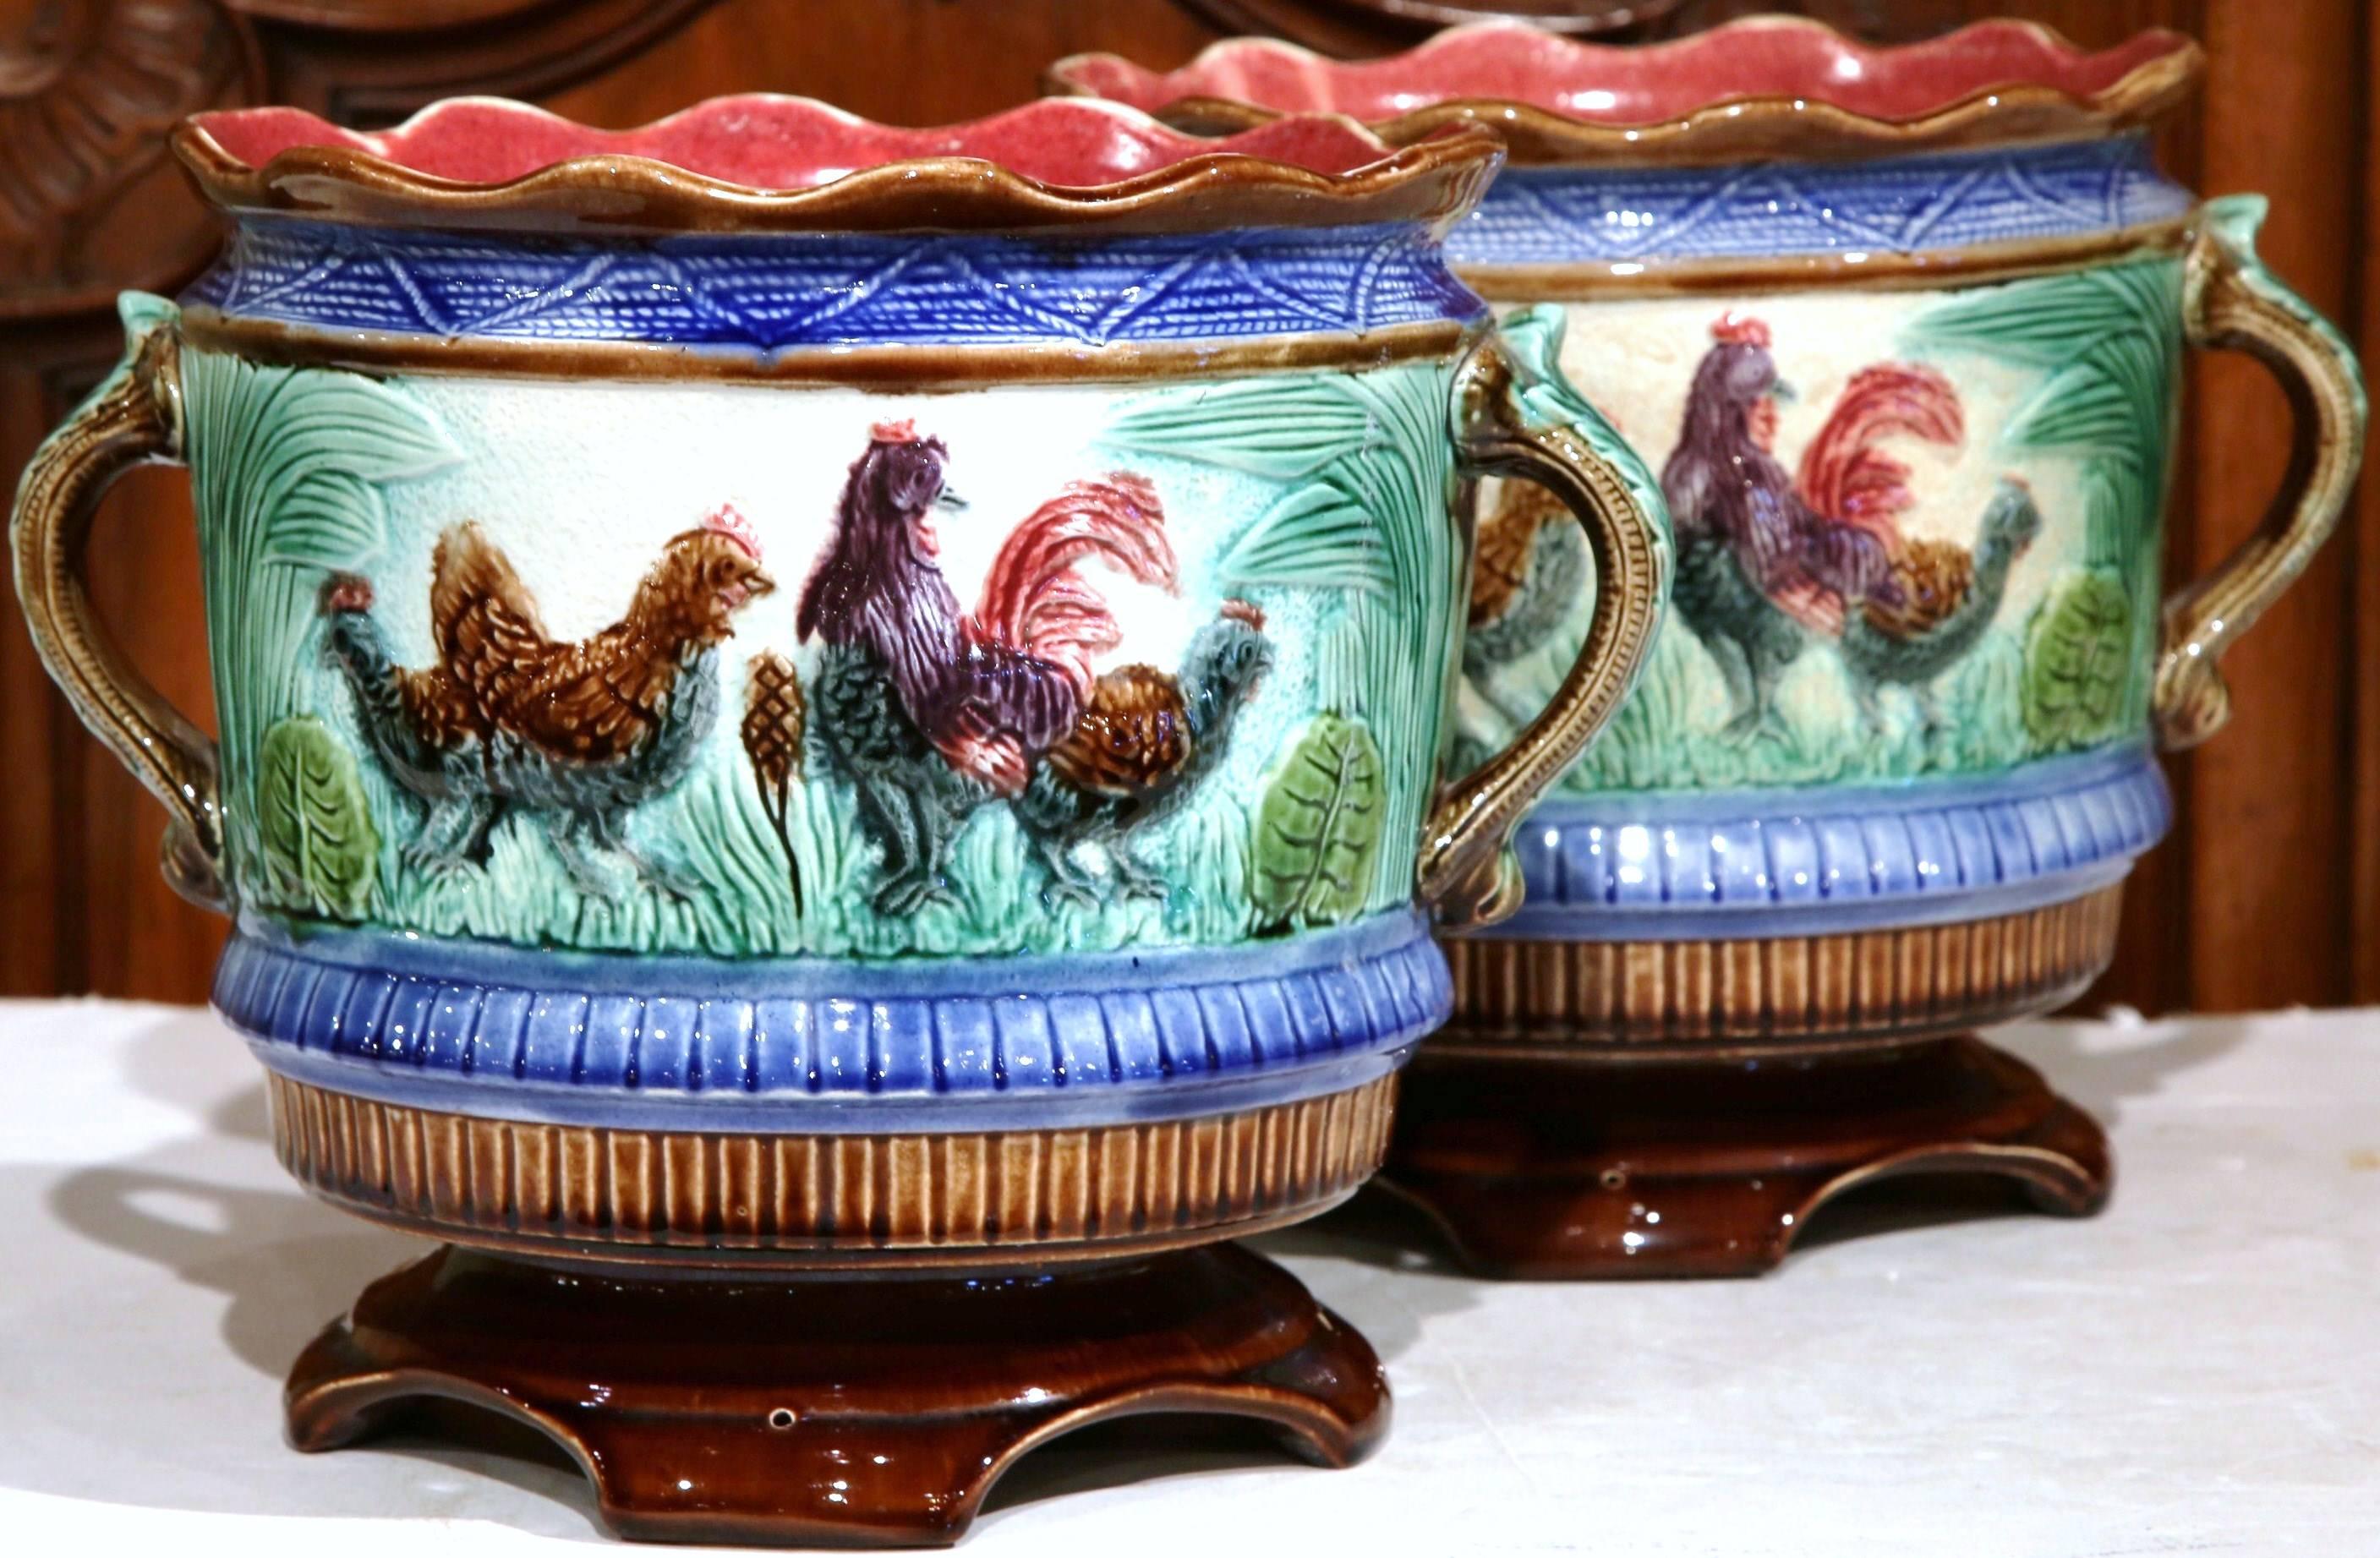 These Majolica jardinières were crafted in France, circa 1880. The colorful, antique pots have scalloped edges at the top, side handles, and sit on small, curved feet. Both of the painted cache pots are illustrated with a Classic, French country